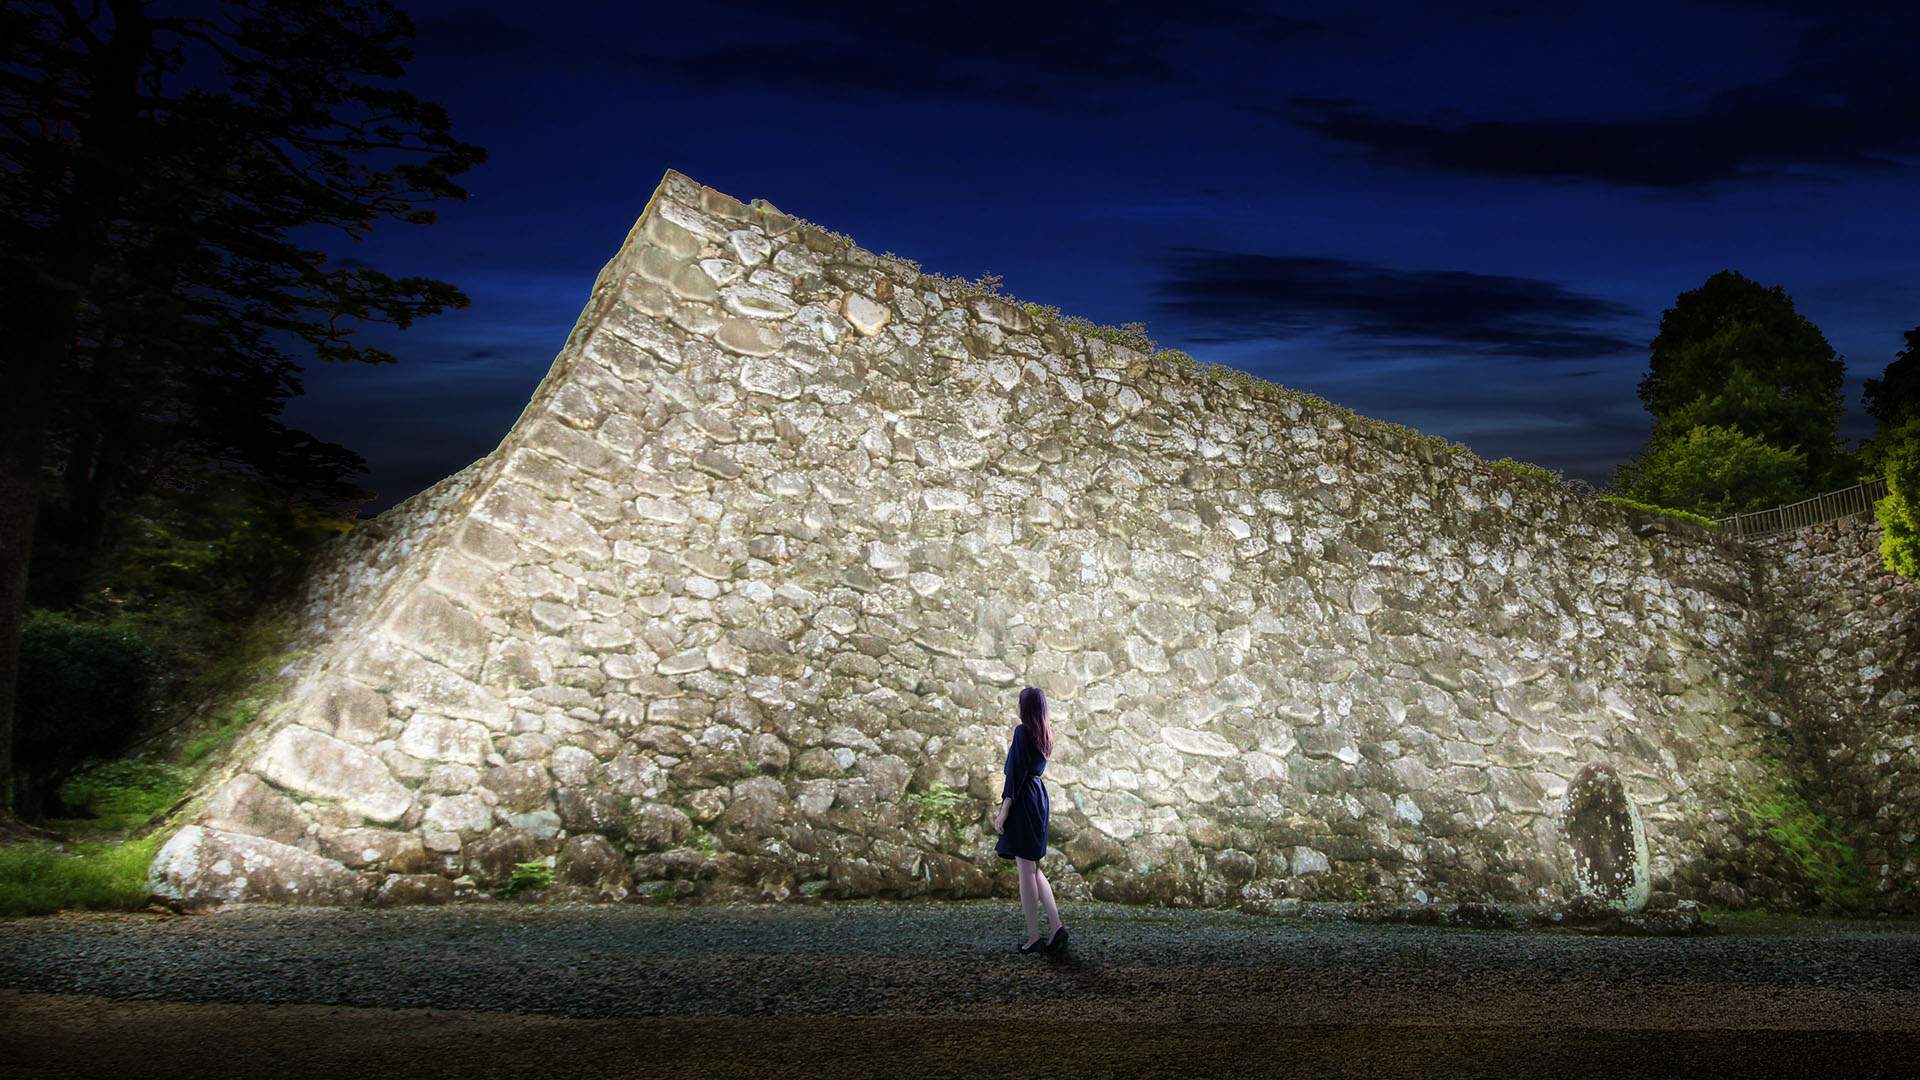 Japan's Latest Dazzling Interactive Art Exhibition Is Taking Over a 400-Year-Old Castle